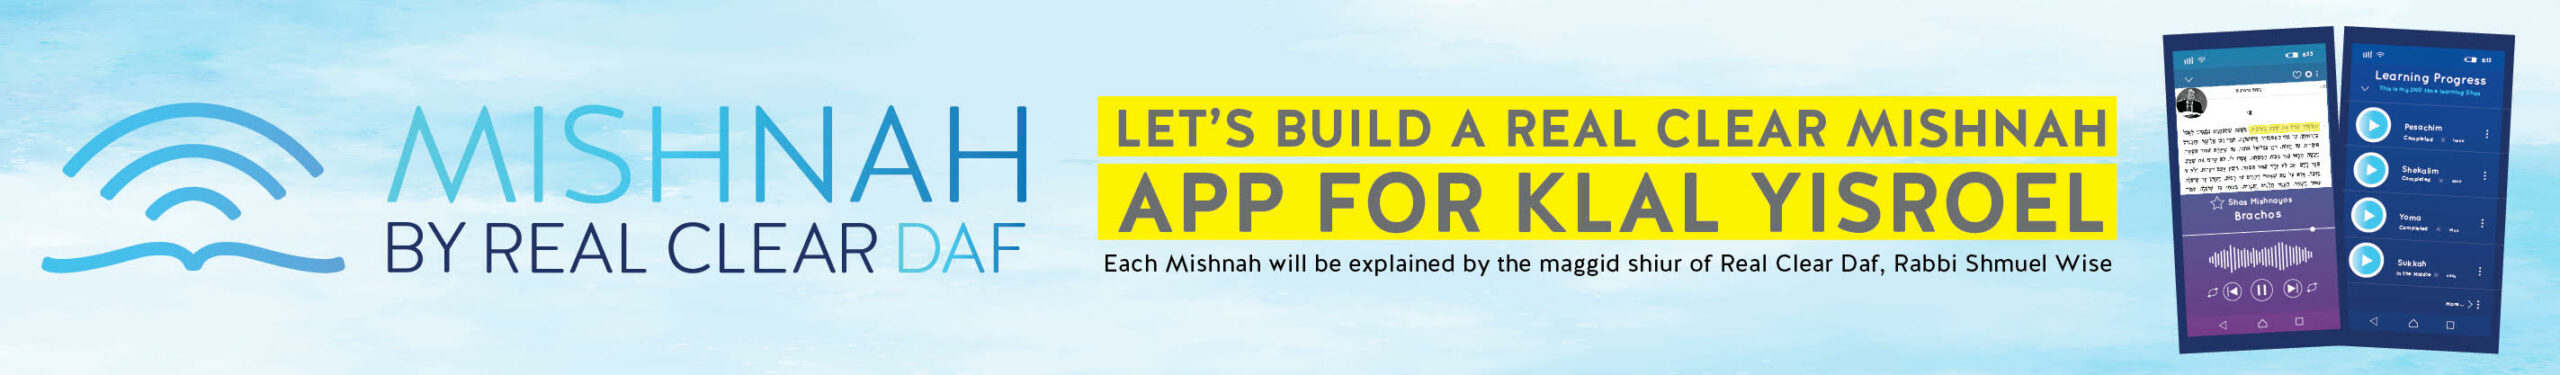 Let's build a Real Clear Mishna app for klal yisrael